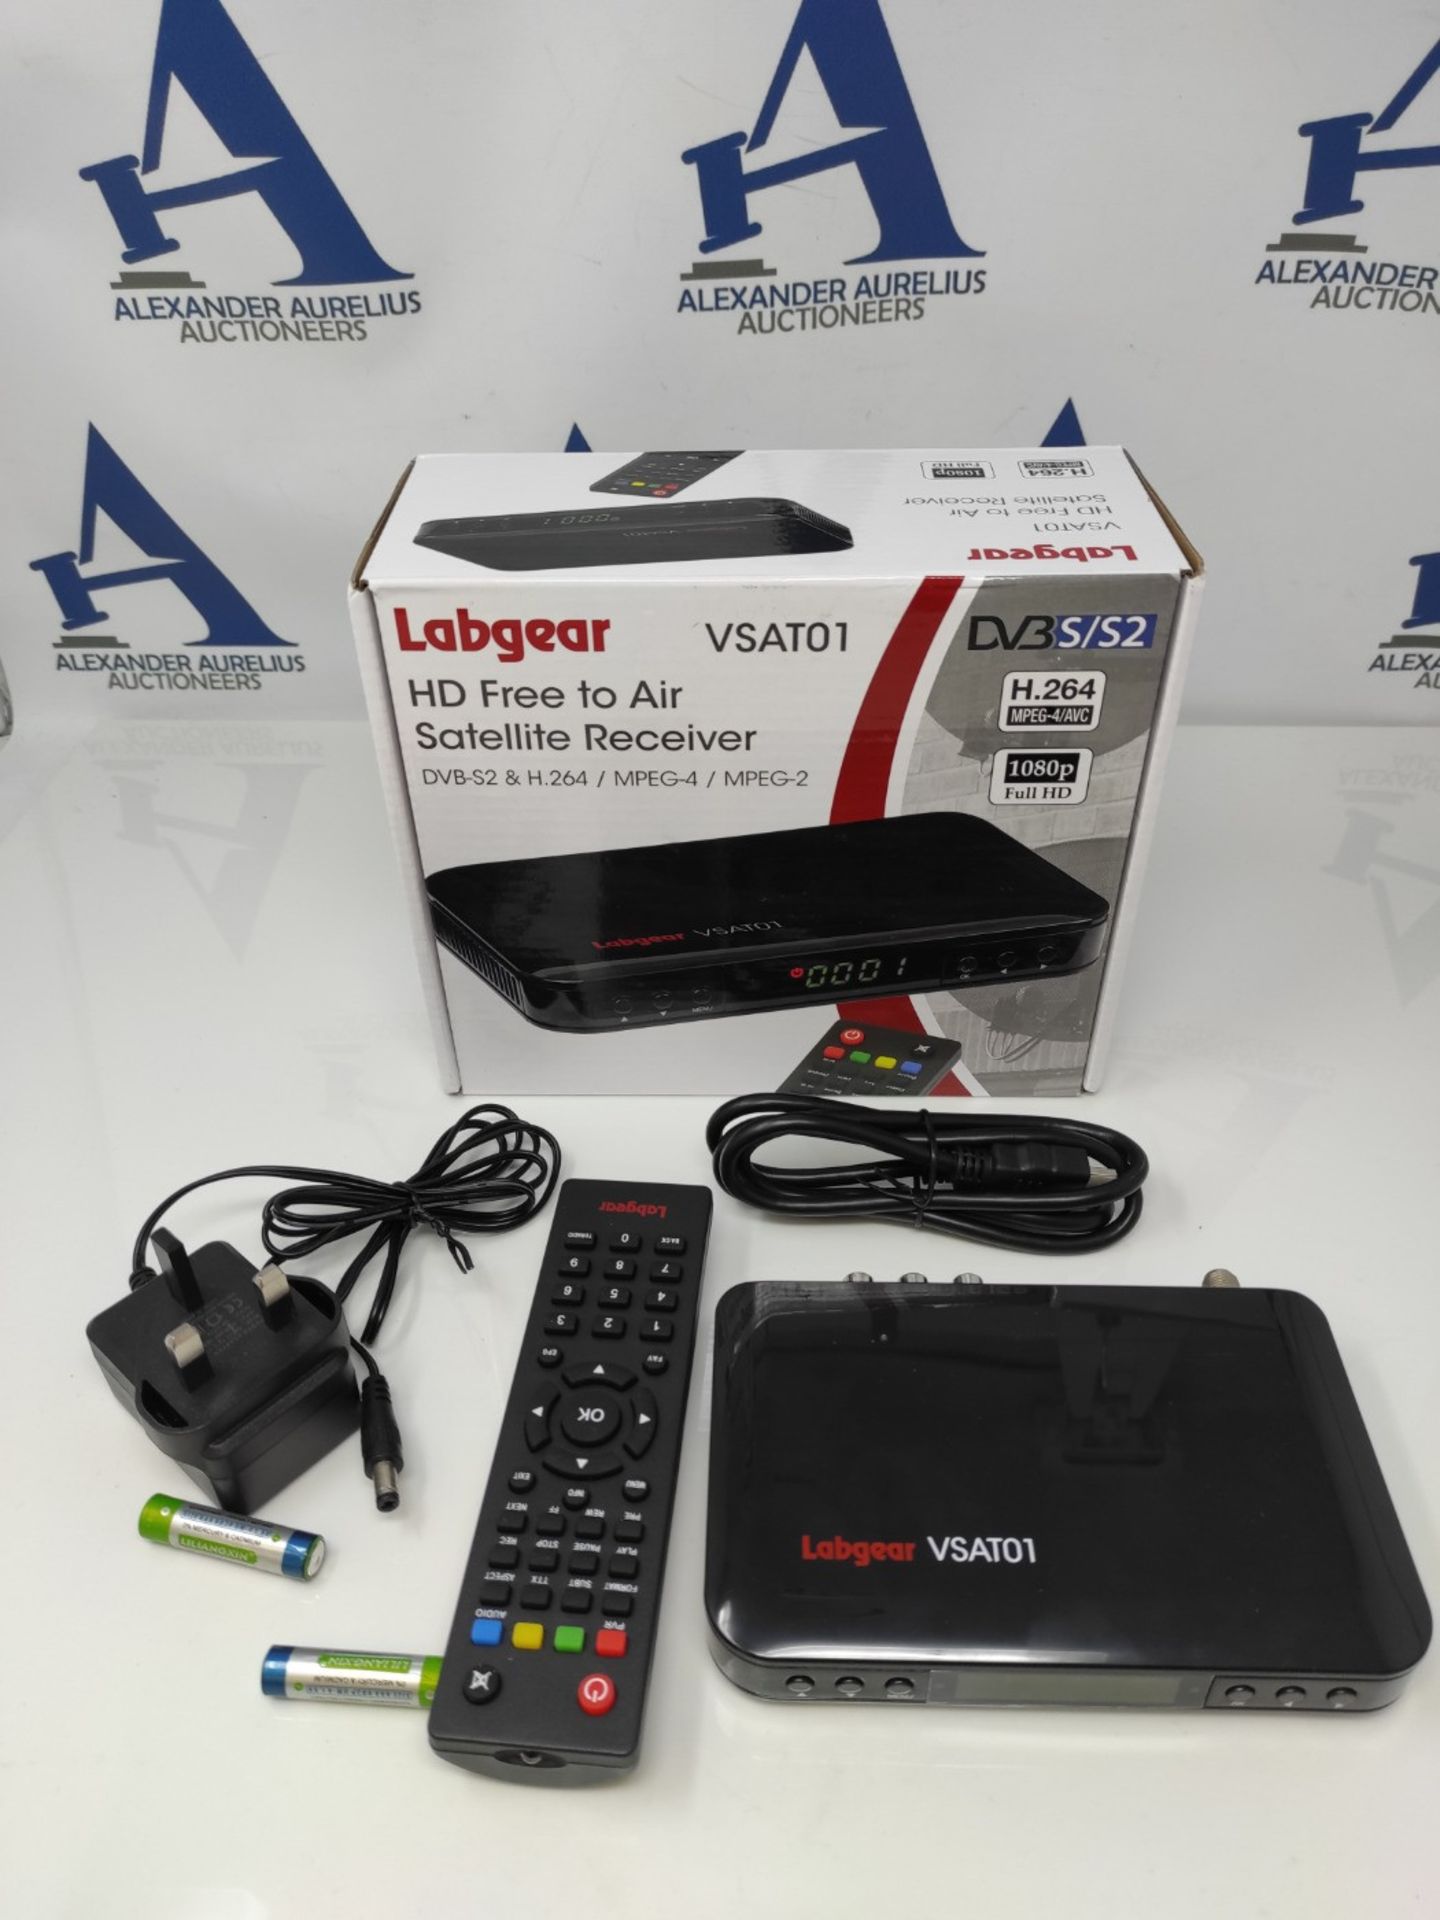 Labgear VSAT01 HD Free-to-Air Satellite Receiver, DVB-S2 & H.264 / MPEG-4 / MPEG-2 - Image 2 of 2